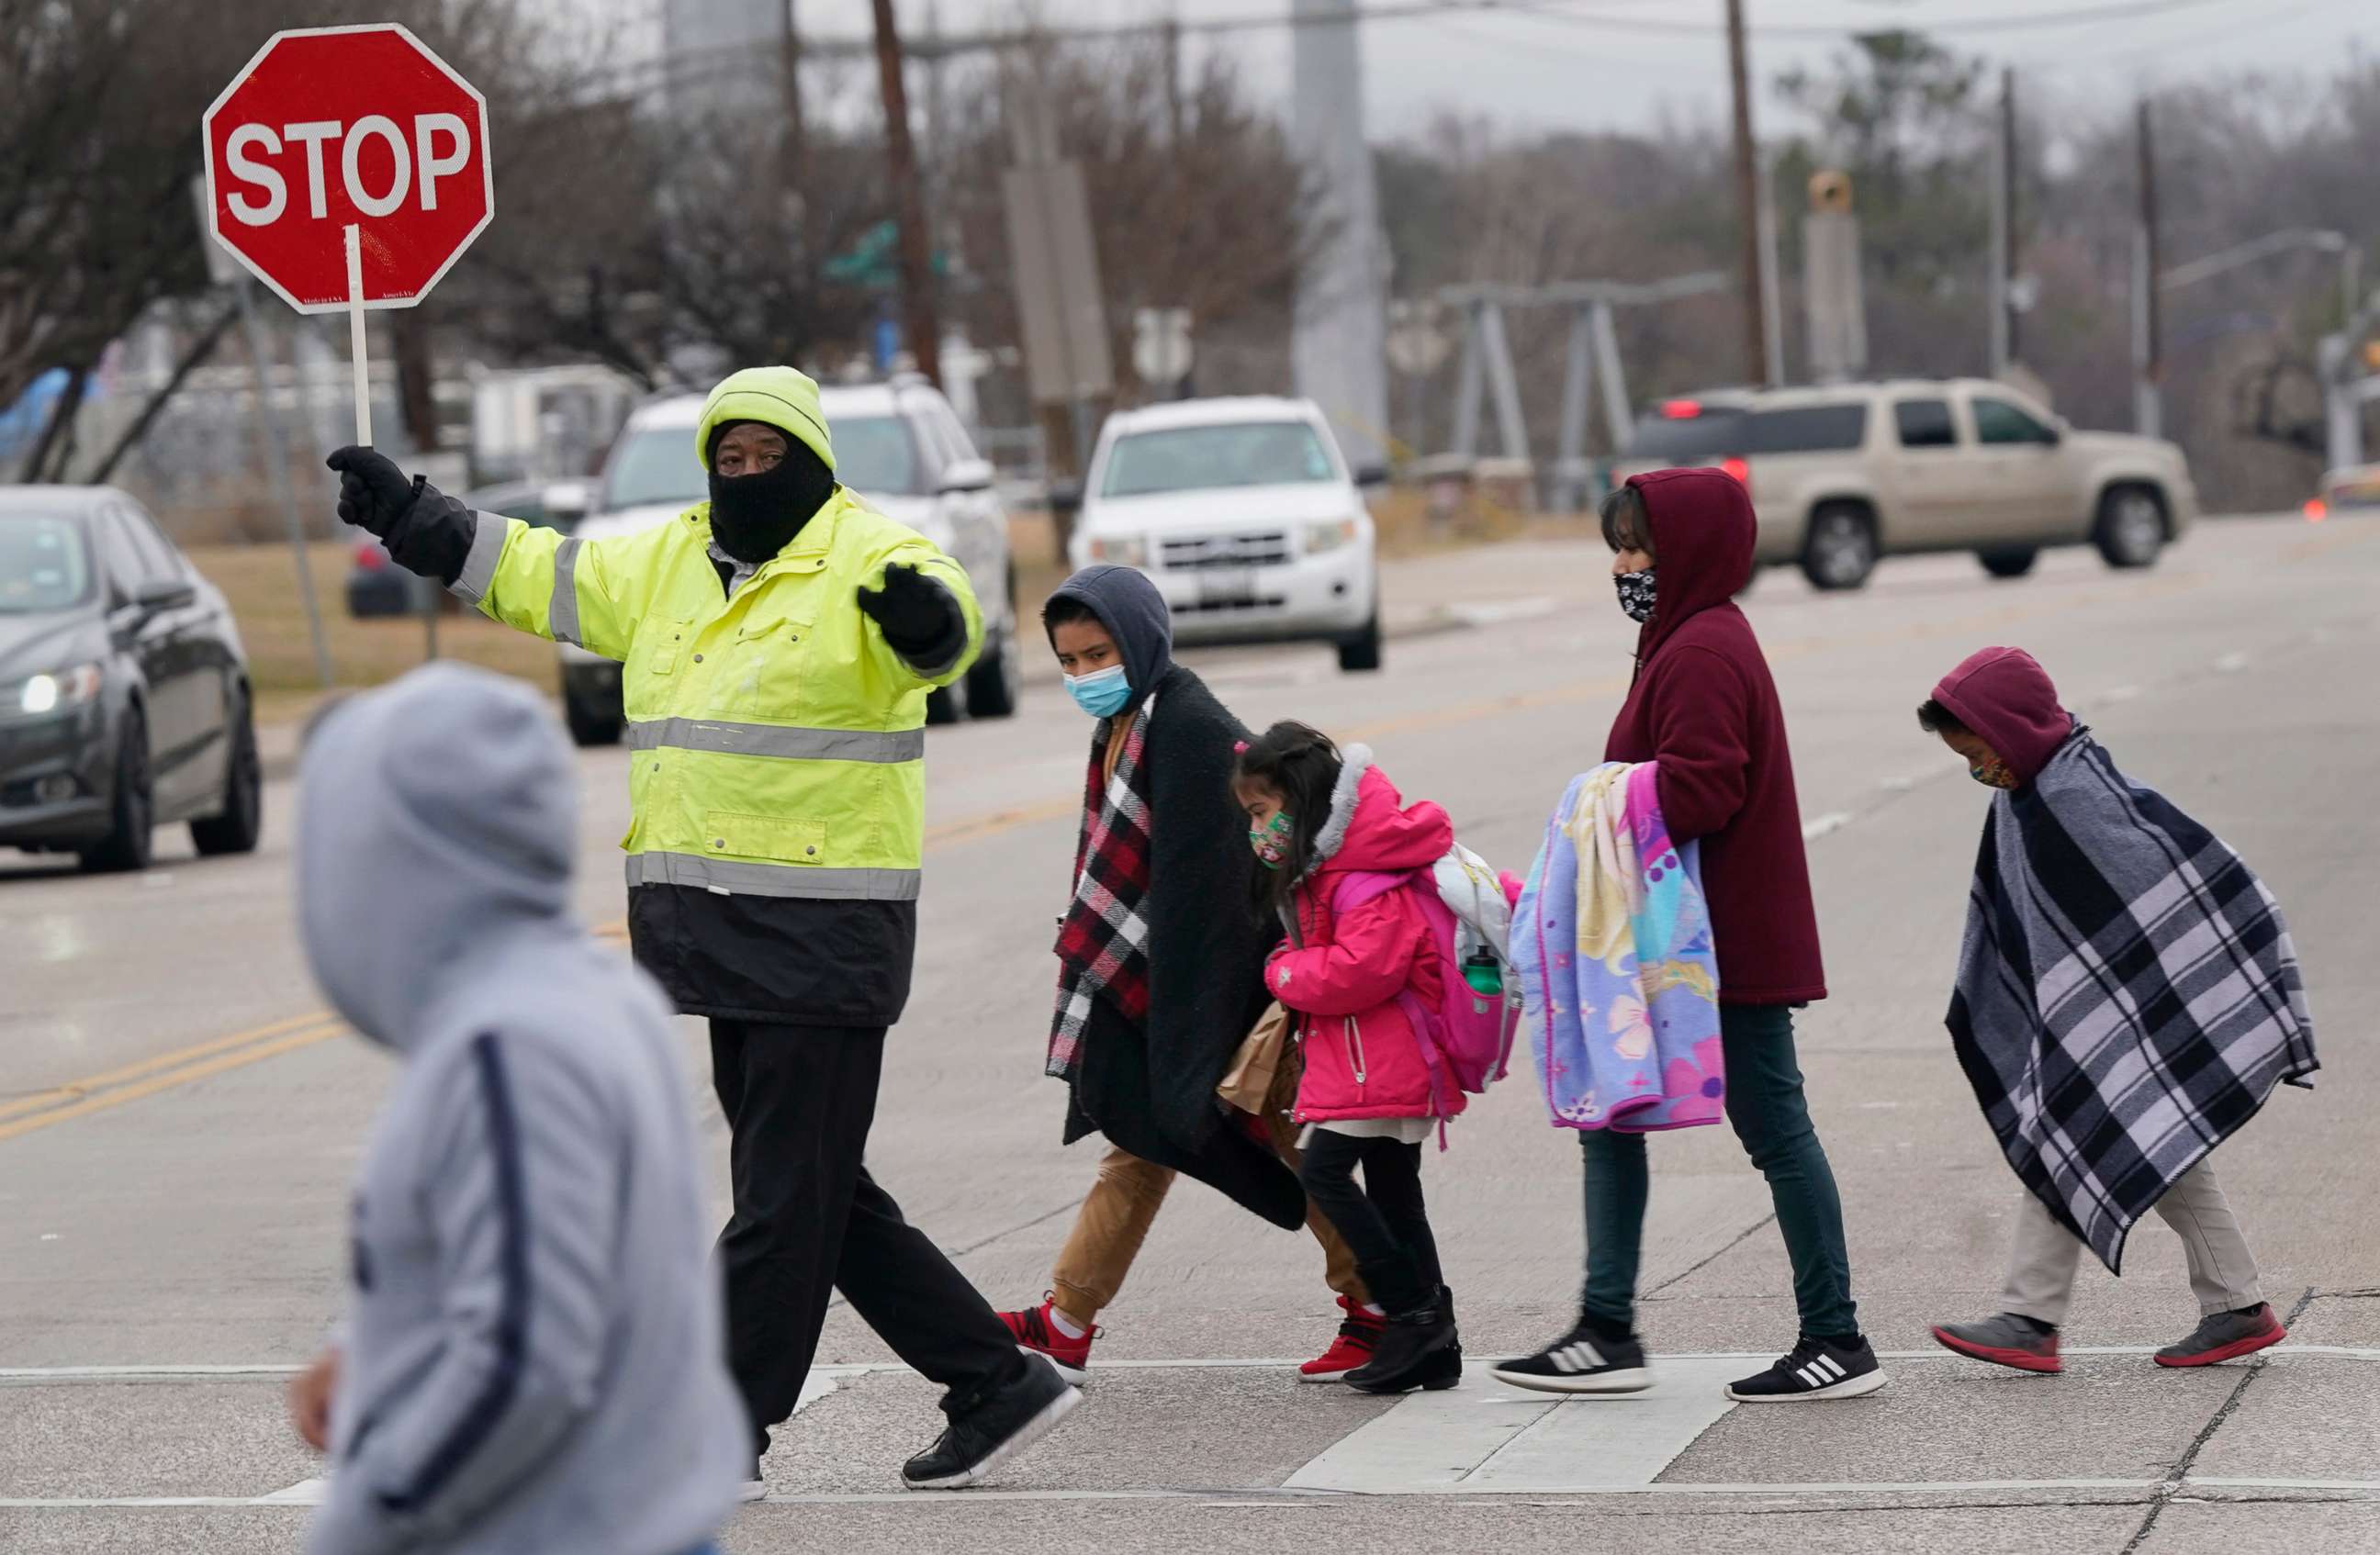 PHOTO: With winter weather coming, crossing guard Willie McCree, stops traffic for a family to cross the street in Dallas, Feb. 2, 2022. North Texas school districts called off classes for the next two days in anticipation of winter weather.